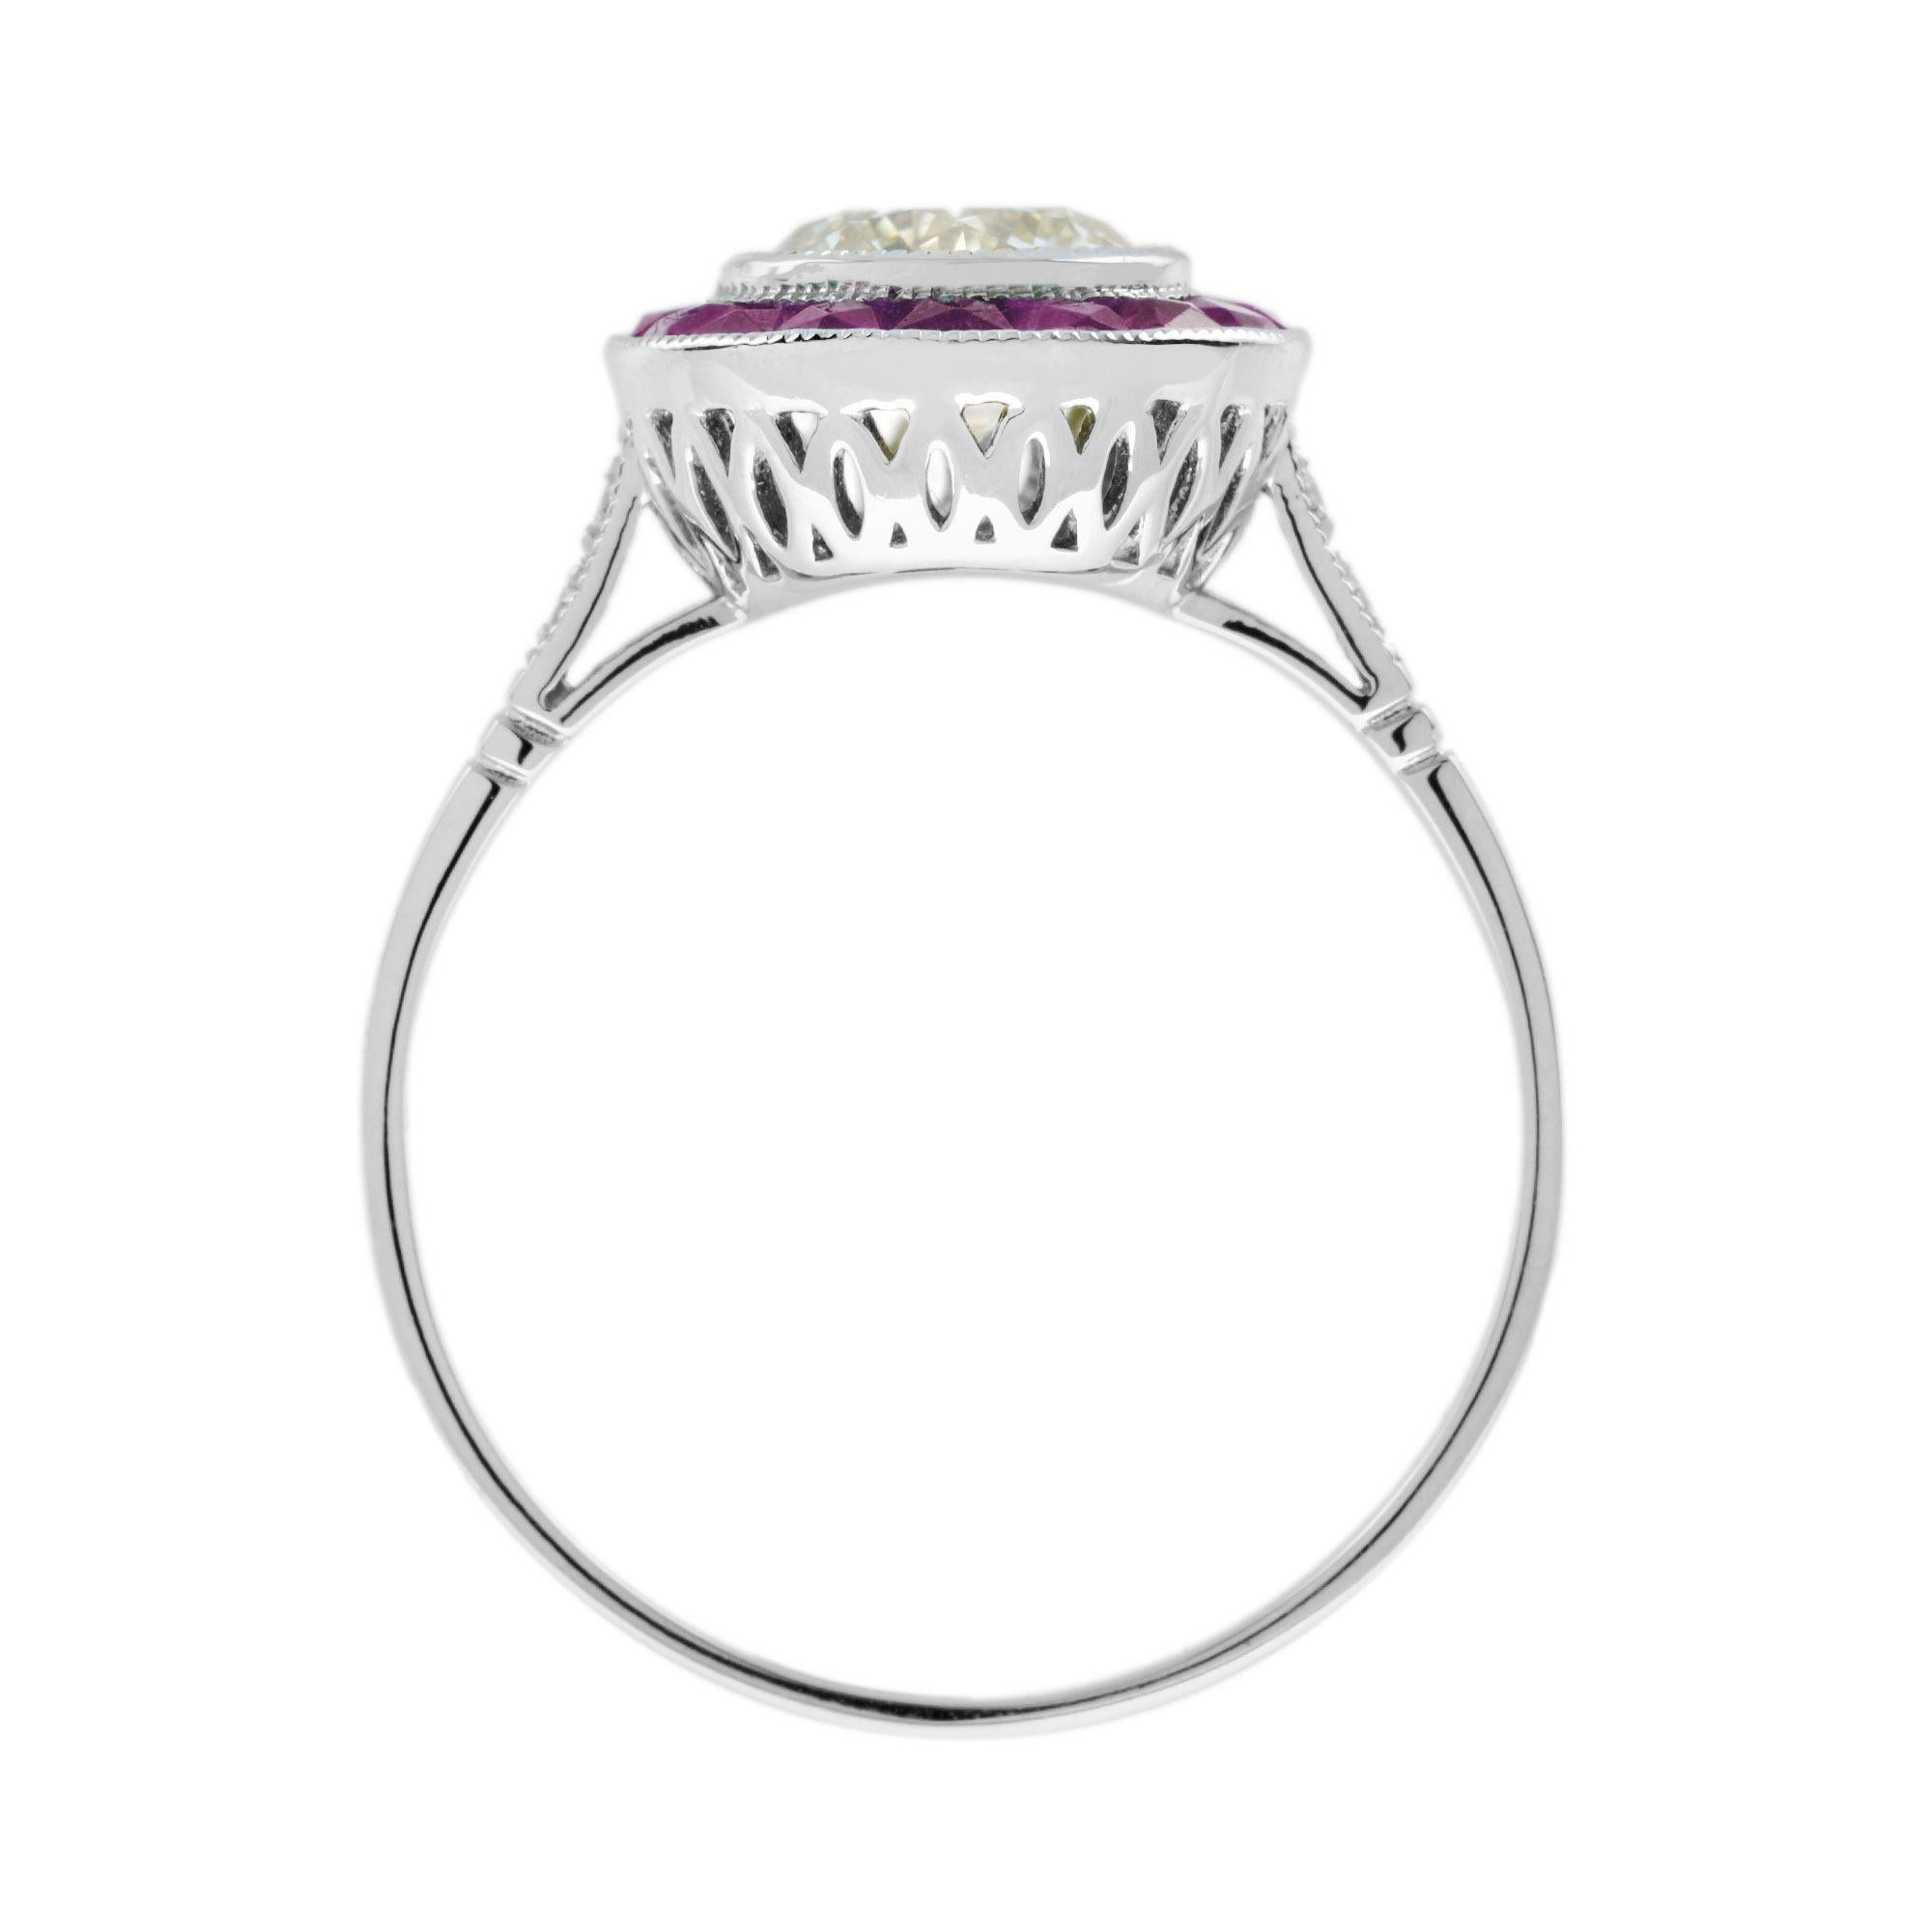 Certified 1 Ct. Diamond and Ruby Art Deco Style Target Ring in Platinum 950 For Sale 3